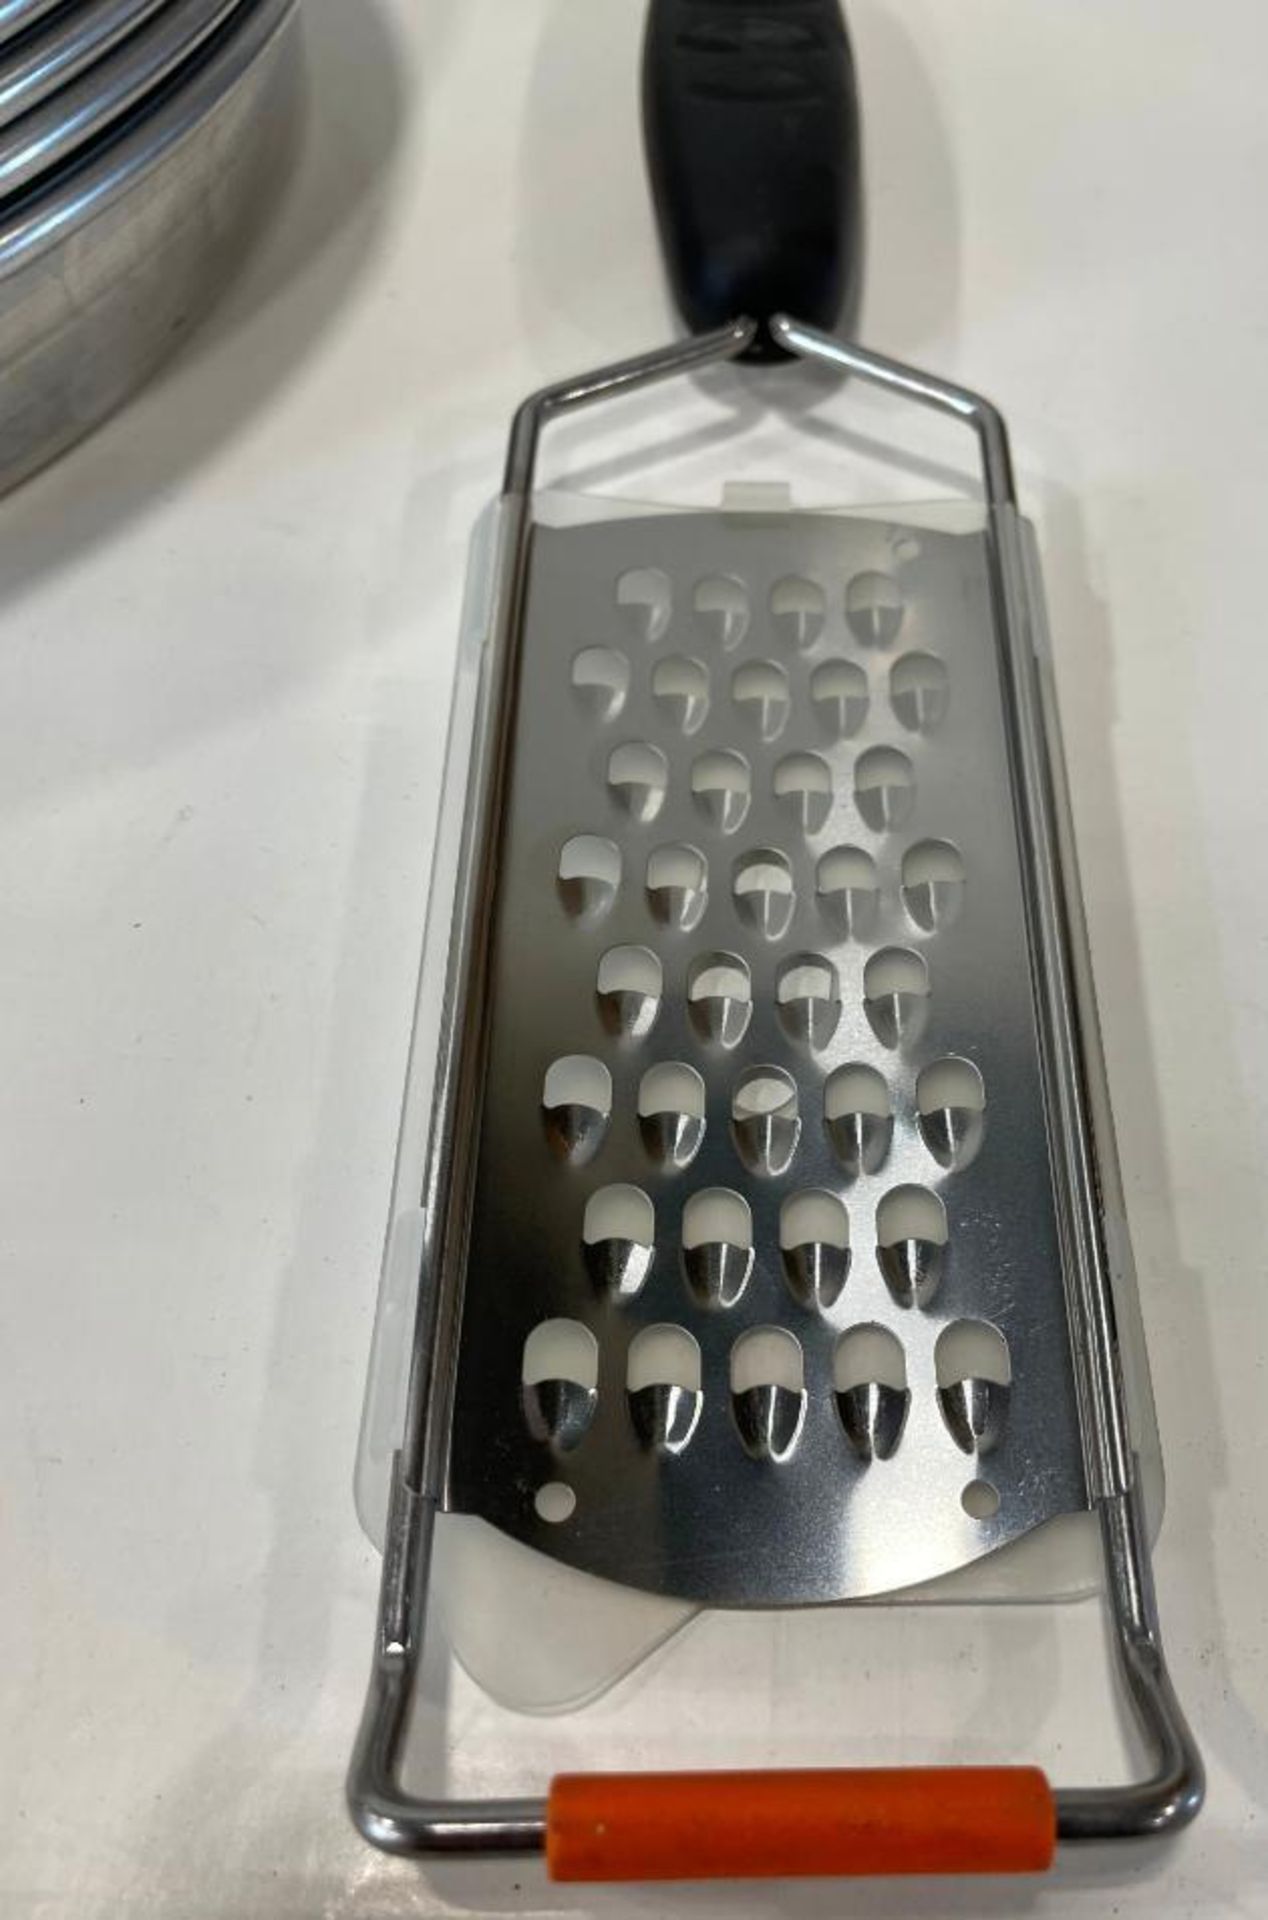 11" PIZZA PAN SET INCLUDING: (4) 15" PIZZA PANS, (2) PIZZA CUTTERS & (3) GRATERS - Image 4 of 9